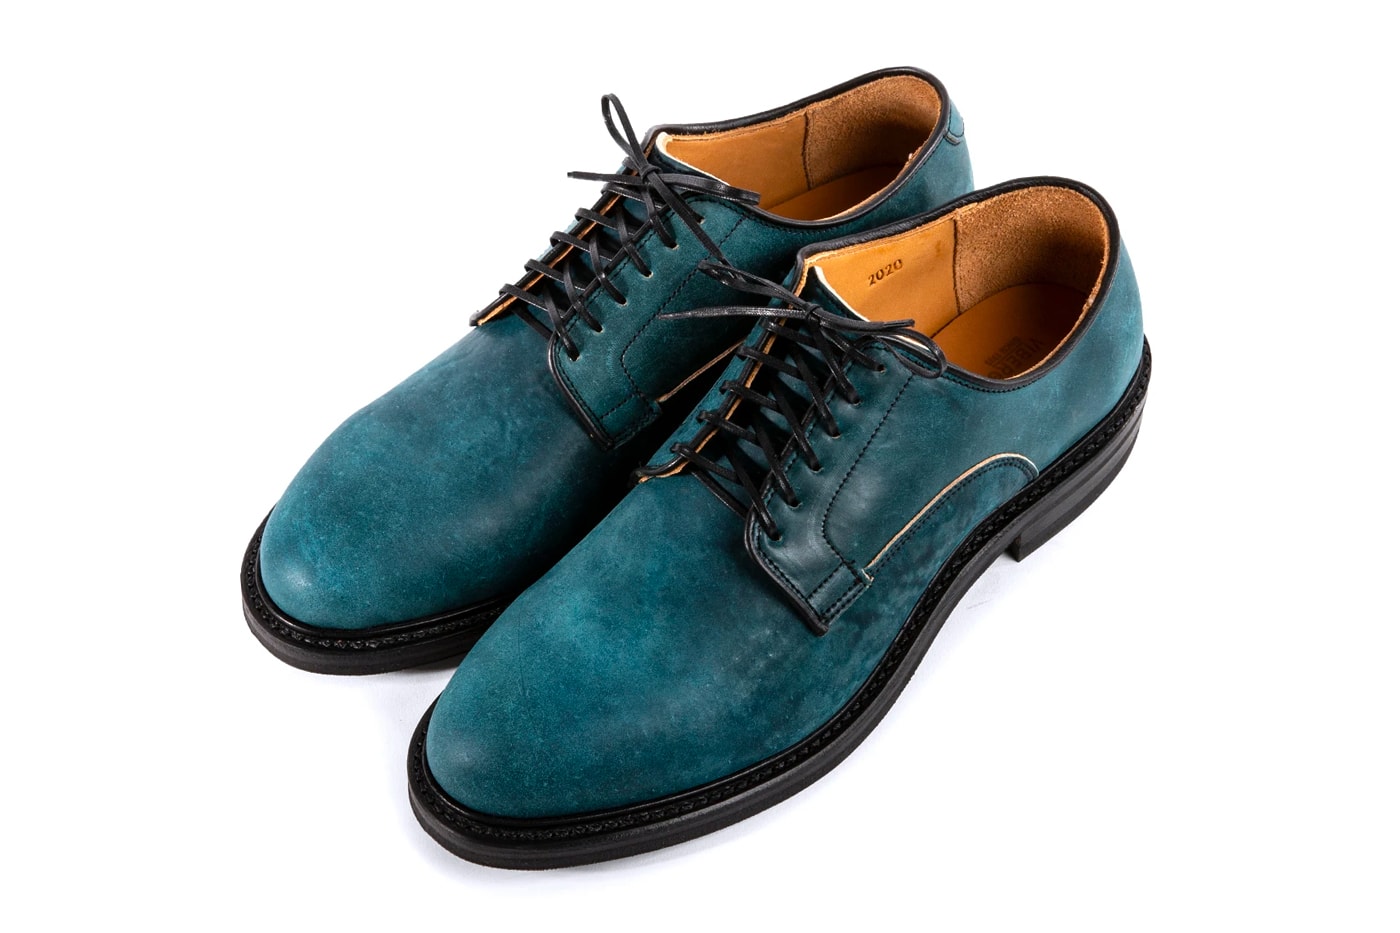 Viberg Intense Blue Tumbled Shell Cordovan Release Boots Service Boots Derby Shoes leather Dainite Goodyear Welt footwear dress shoes handmade craftsmanship 